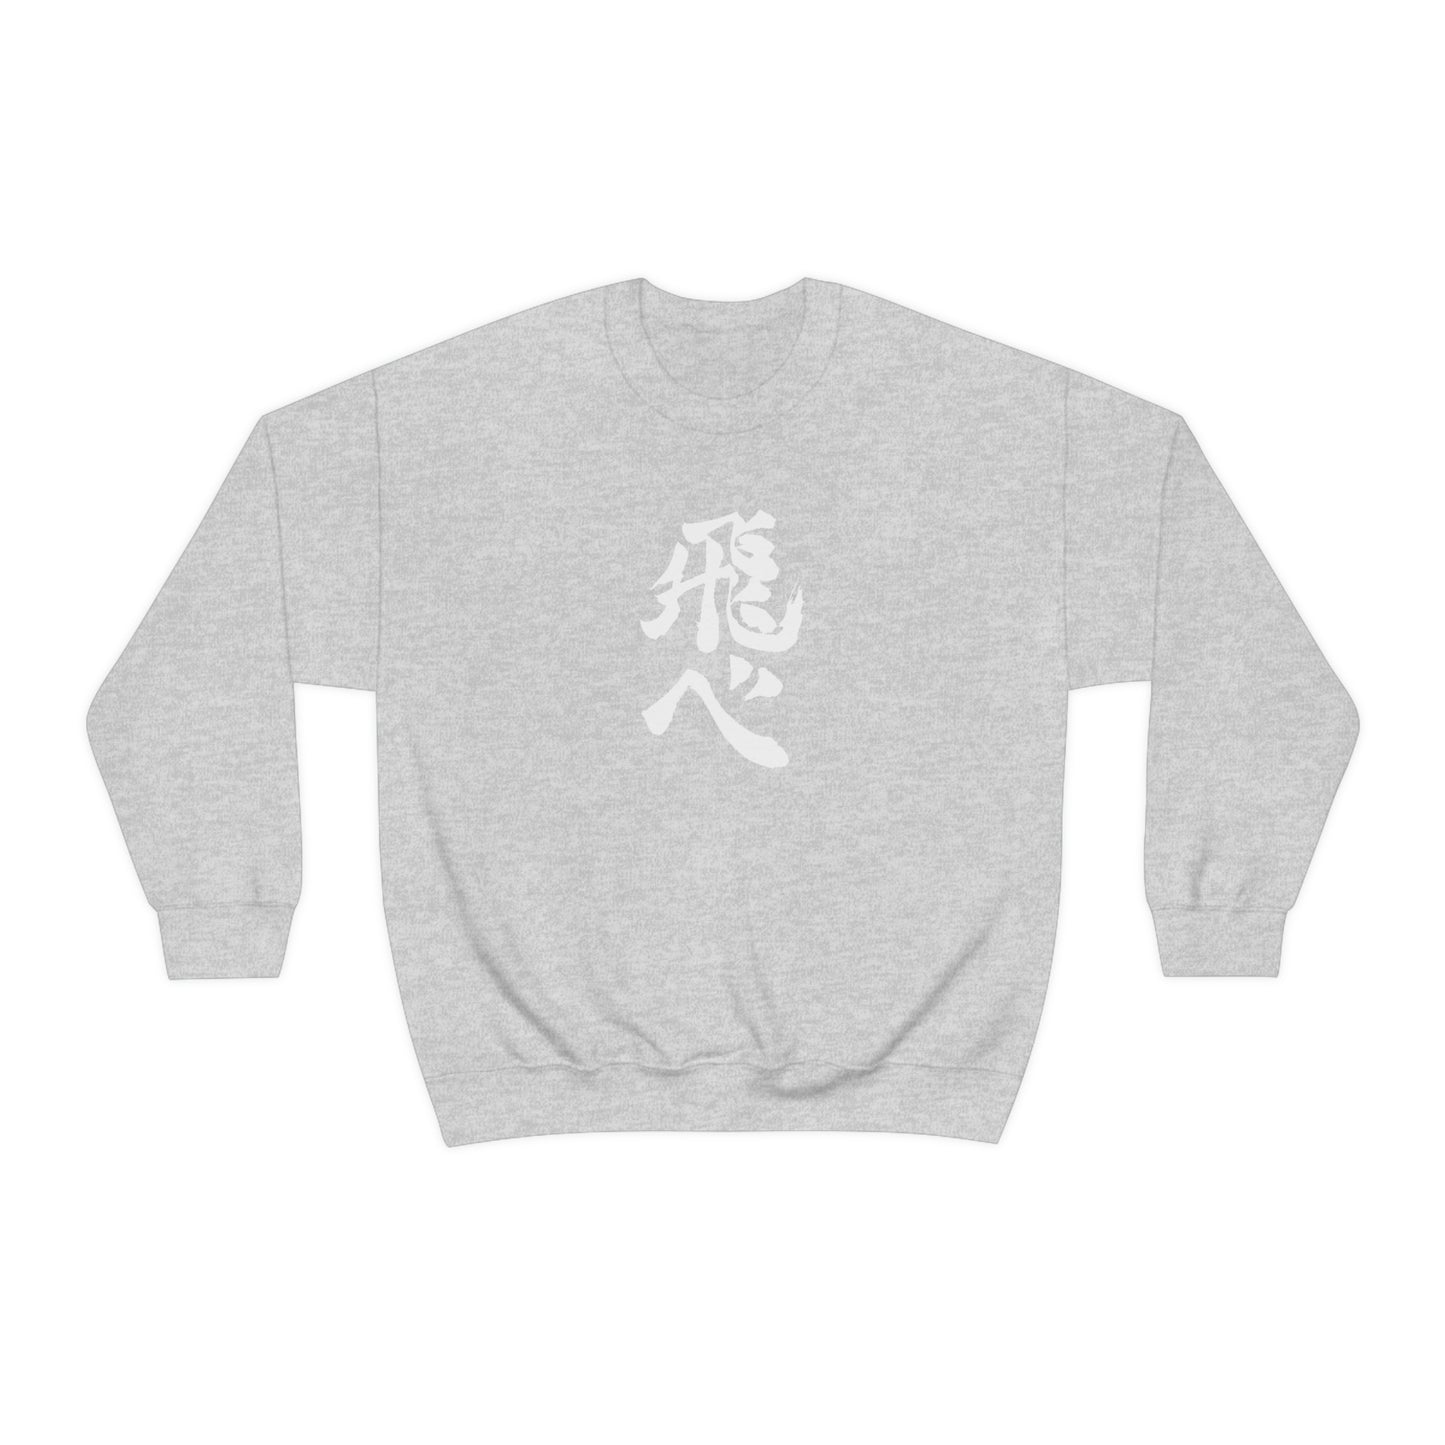 FLY sweatshirt Volleyball Club Fly shirt High Volleyball club sweater pullover jumper